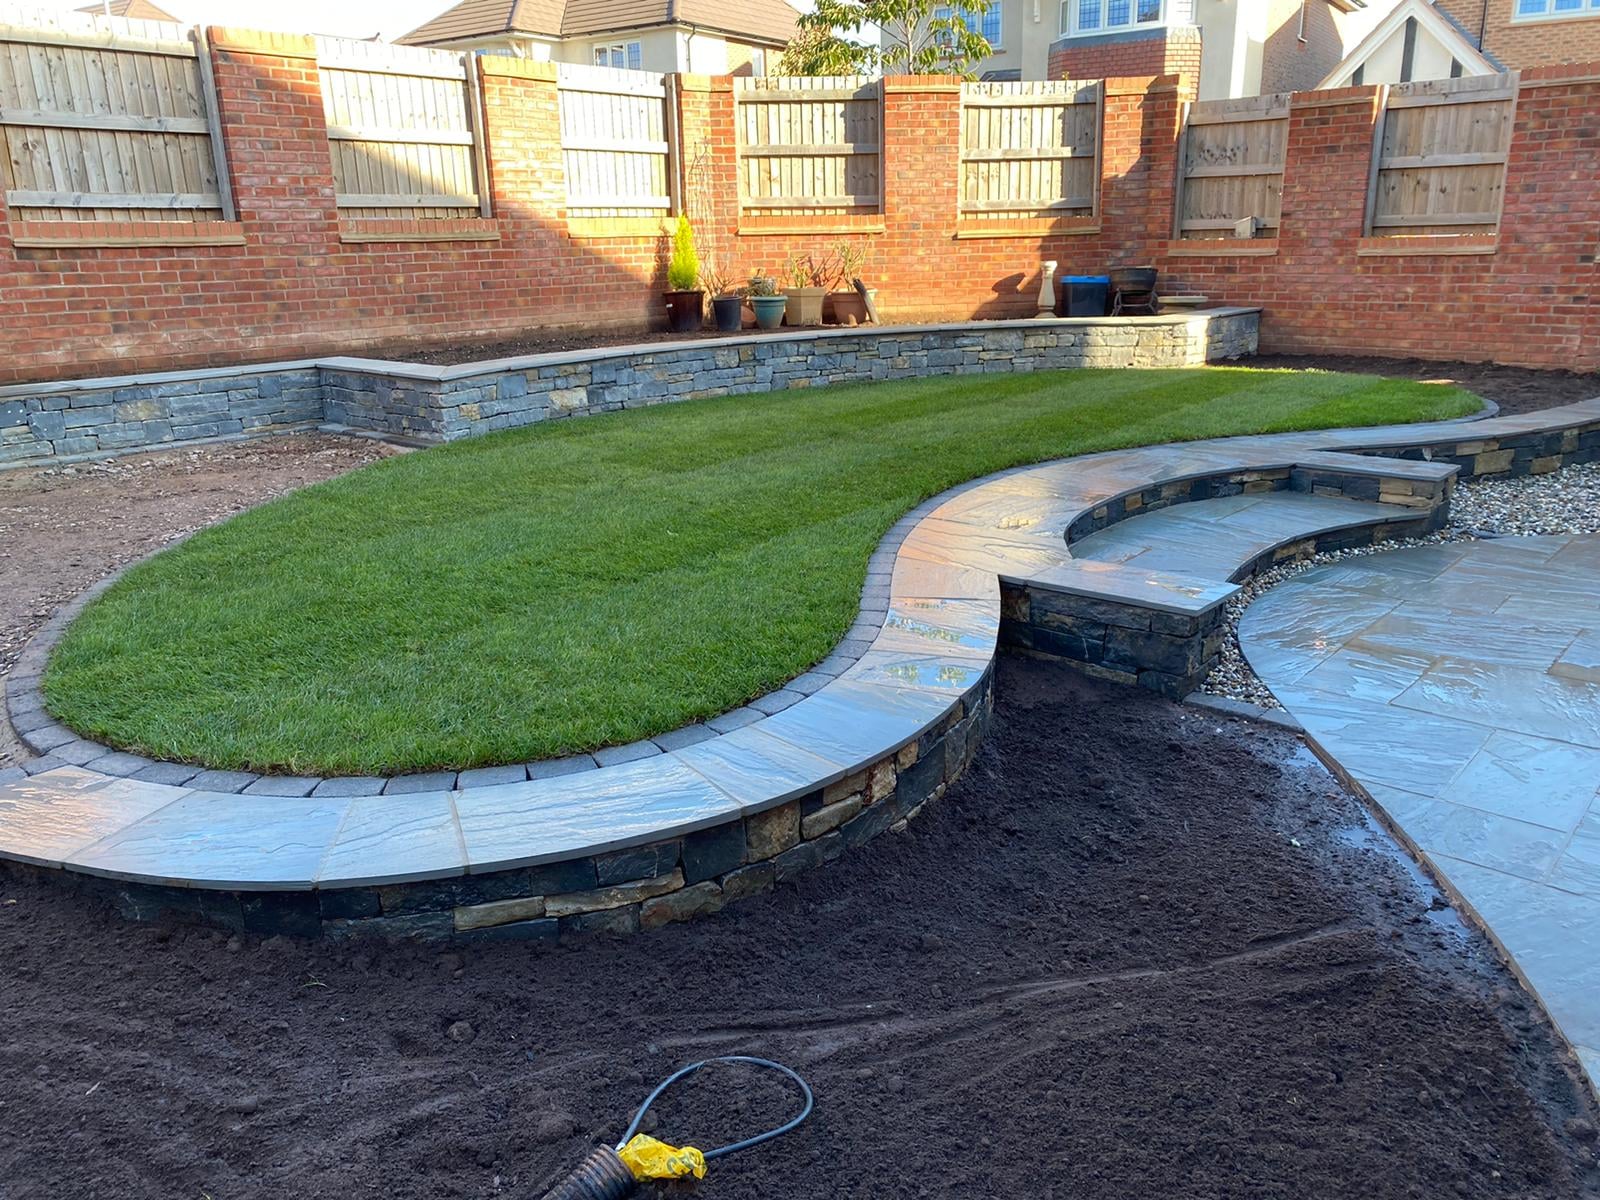 Boomerang Lawn Case Study - During - Grass laid